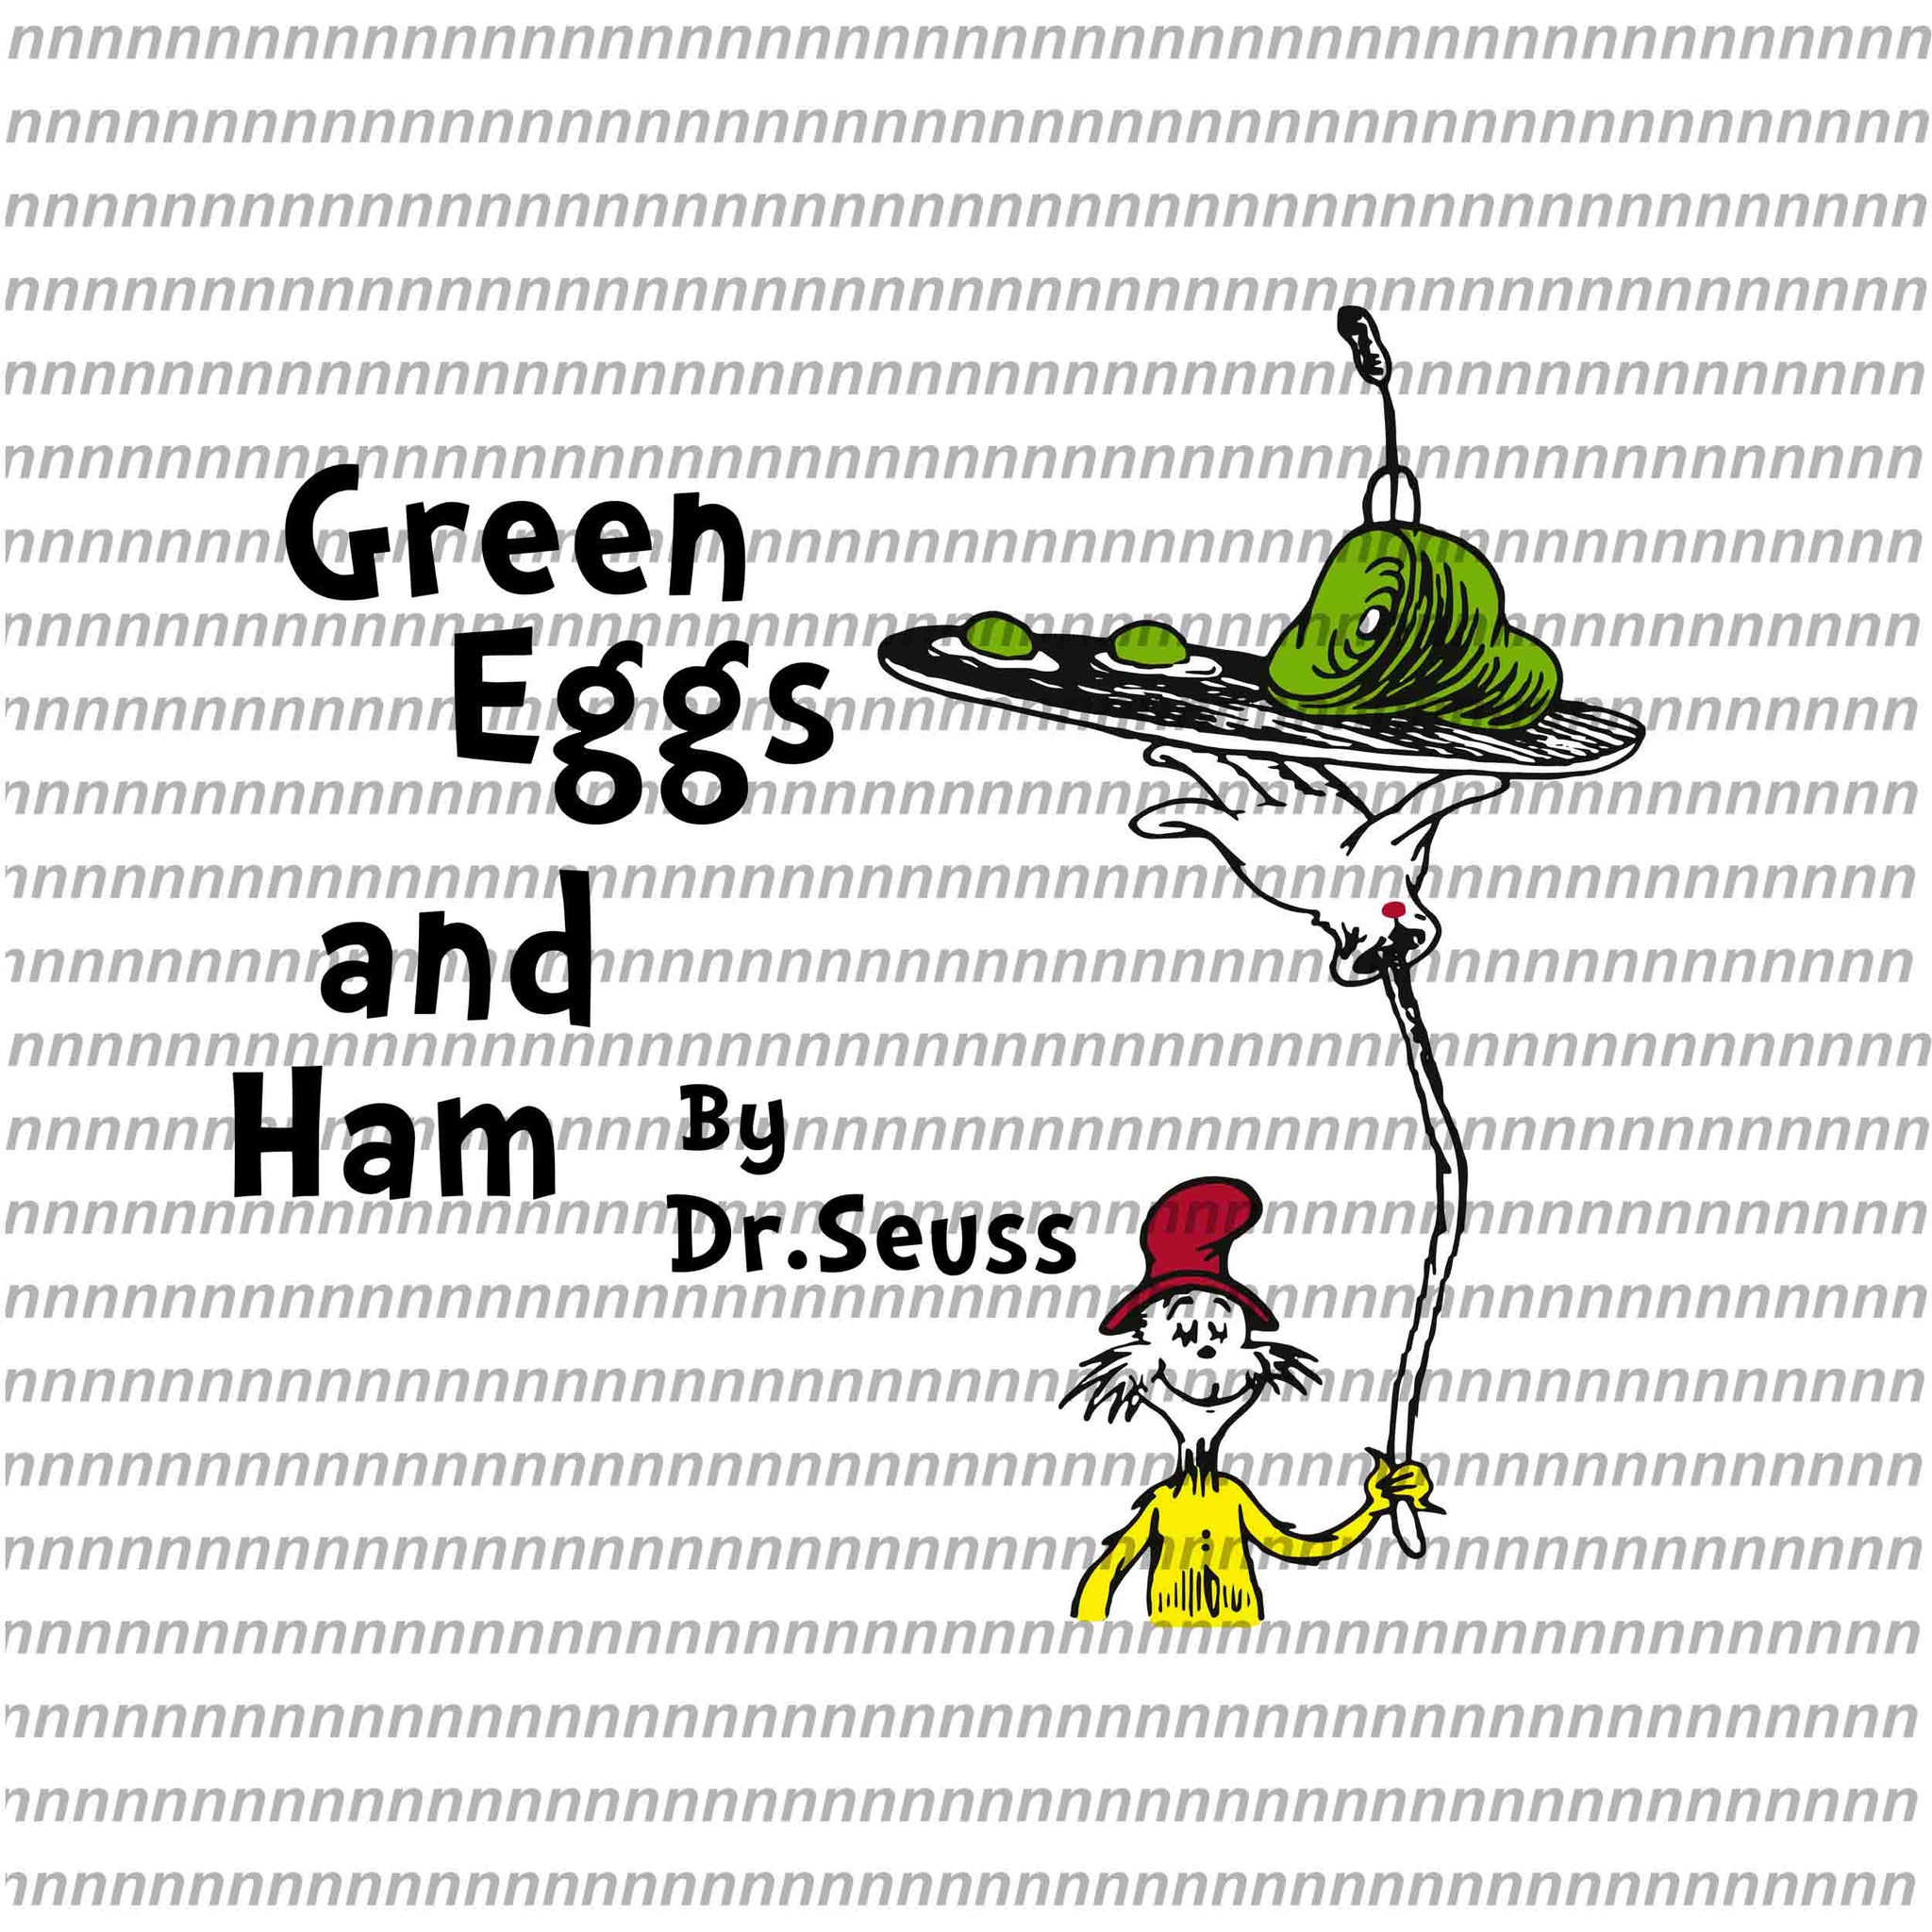 Green eggs and ham by dr.seuss,Dr Seuss svg, Dr Seuss vector,Dr Seuss quote, Dr Seuss design, Cat in the hat svg, thing 1 thing 2 thing 3, svg, png, dxf, eps file